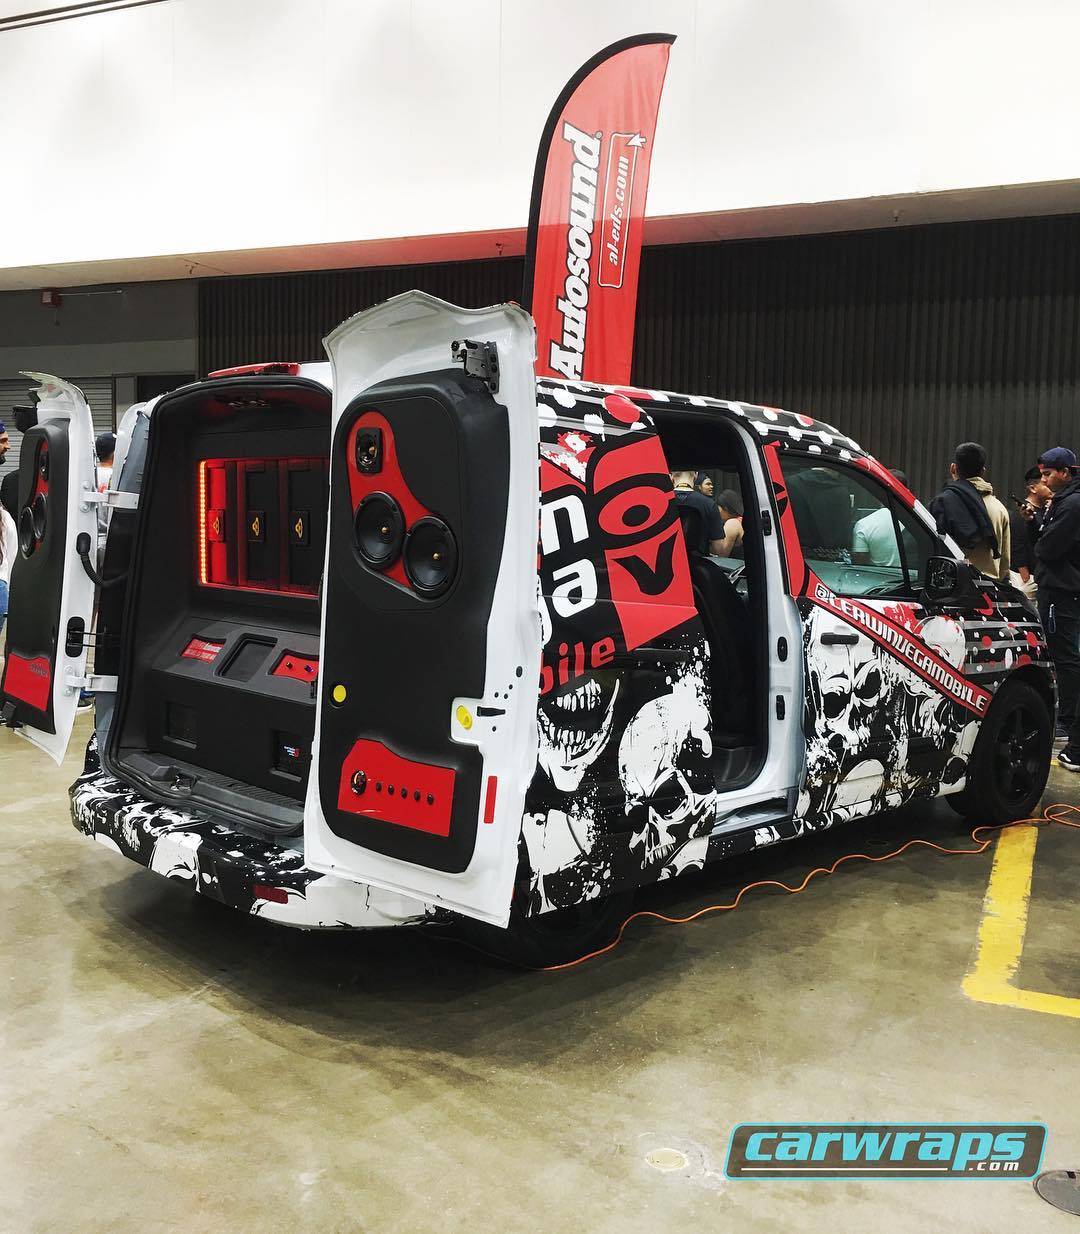 All the feels for this OG Brand : by car wraps.com #cerwinvegamobile #doyou #vehiclewrap #instagood #losangeles #carwrap #socal #instadaily #marketing #thumper #subs #alandedsautosound @cerwinvegamobile